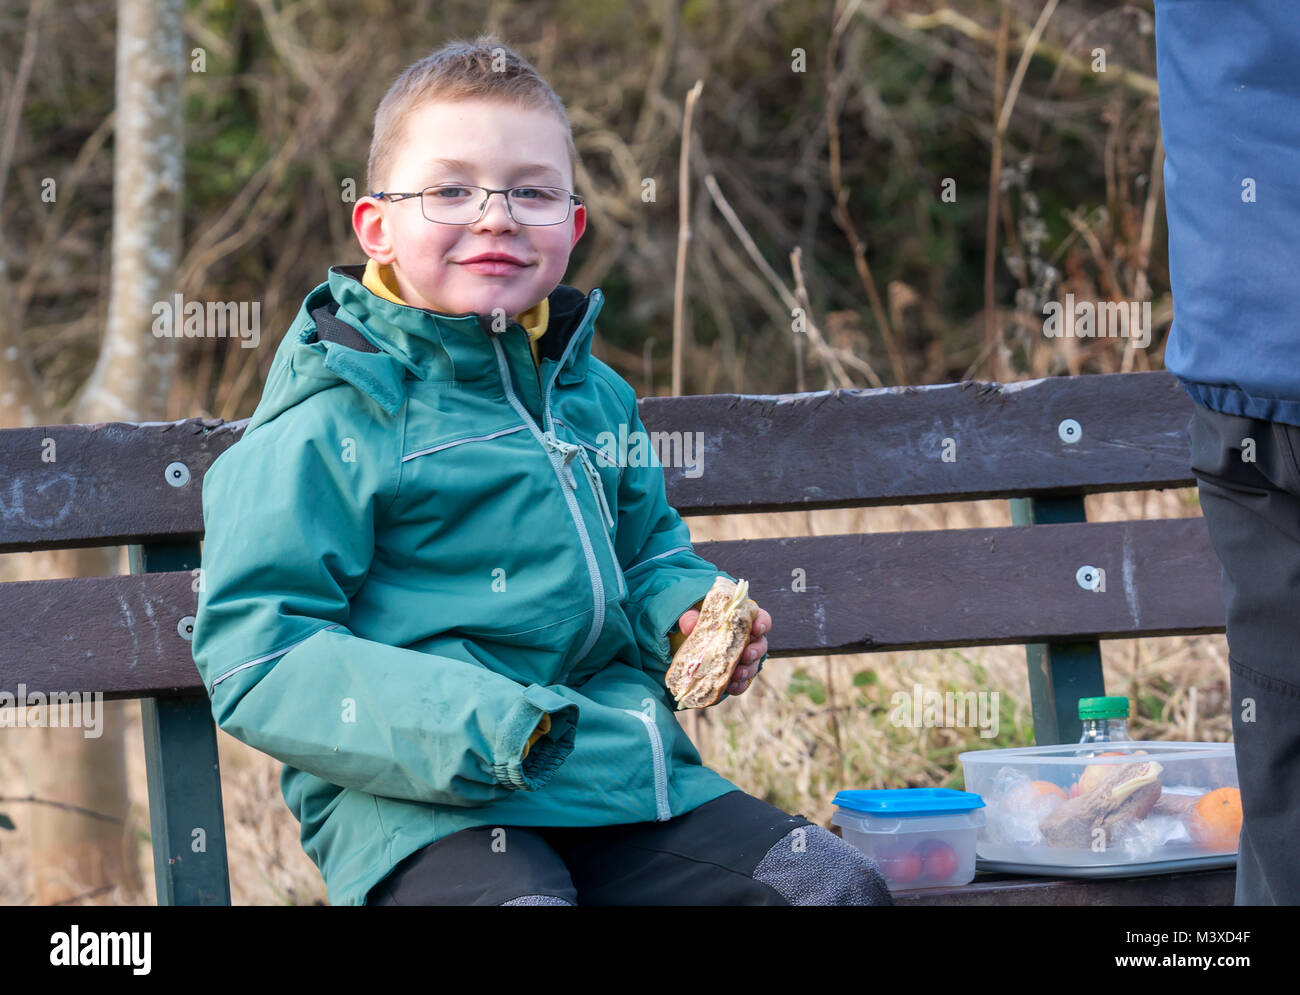 6 year old smiling boy wearing glasses sitting on a bench having a picnic lunch.  He is holding a ham and cheese roll, in Winter, Scotland, UK Stock Photo